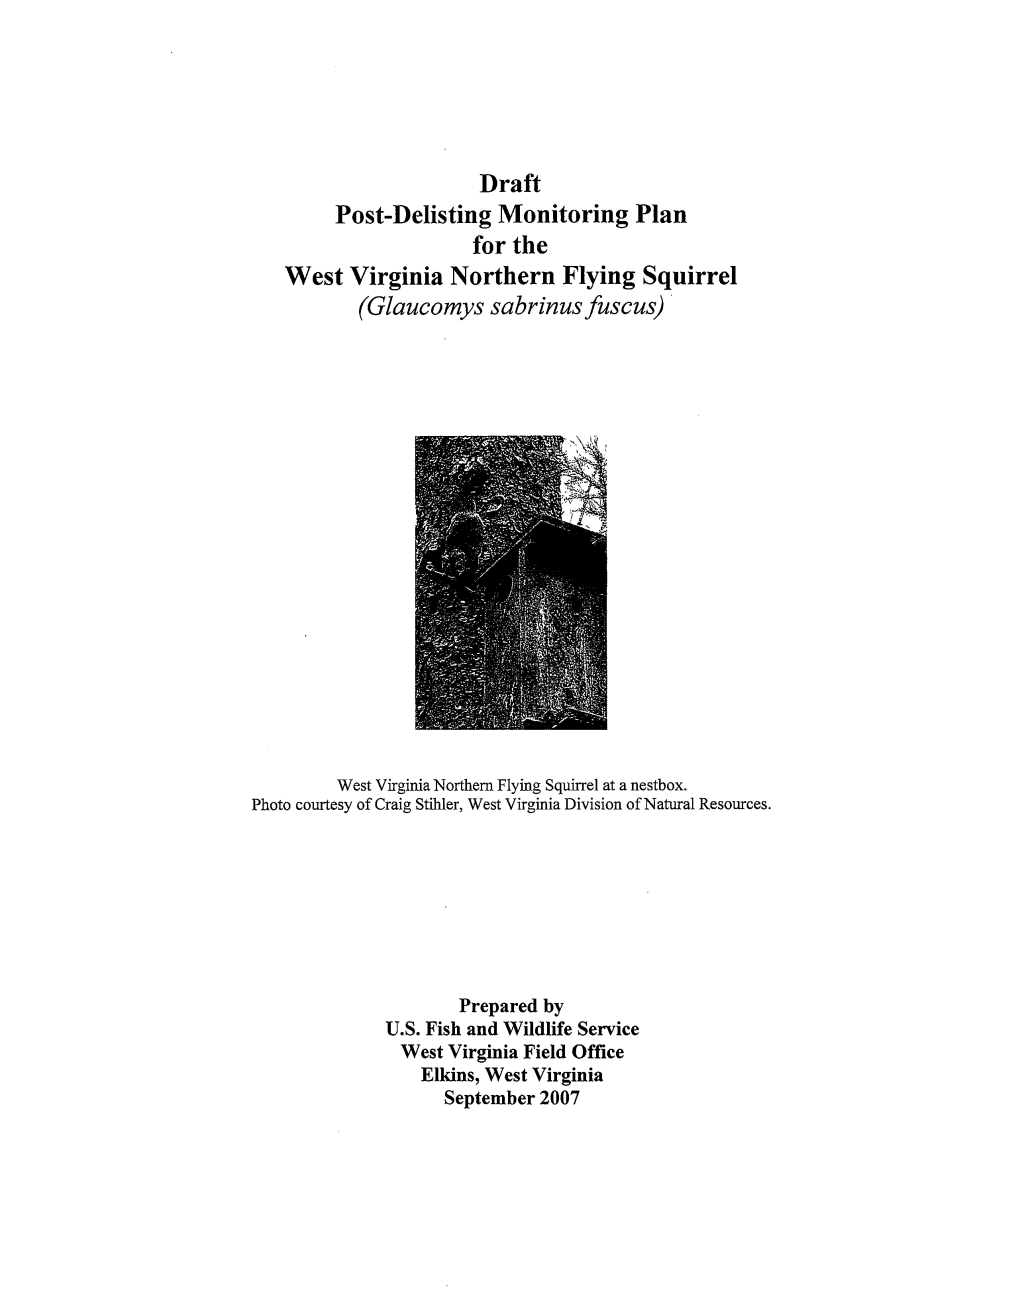 Draft Post-Delisting Monitoring Plan for the West Virginia Northern Flying Squirrel (Glaucomys Sabrinus Fuscus)